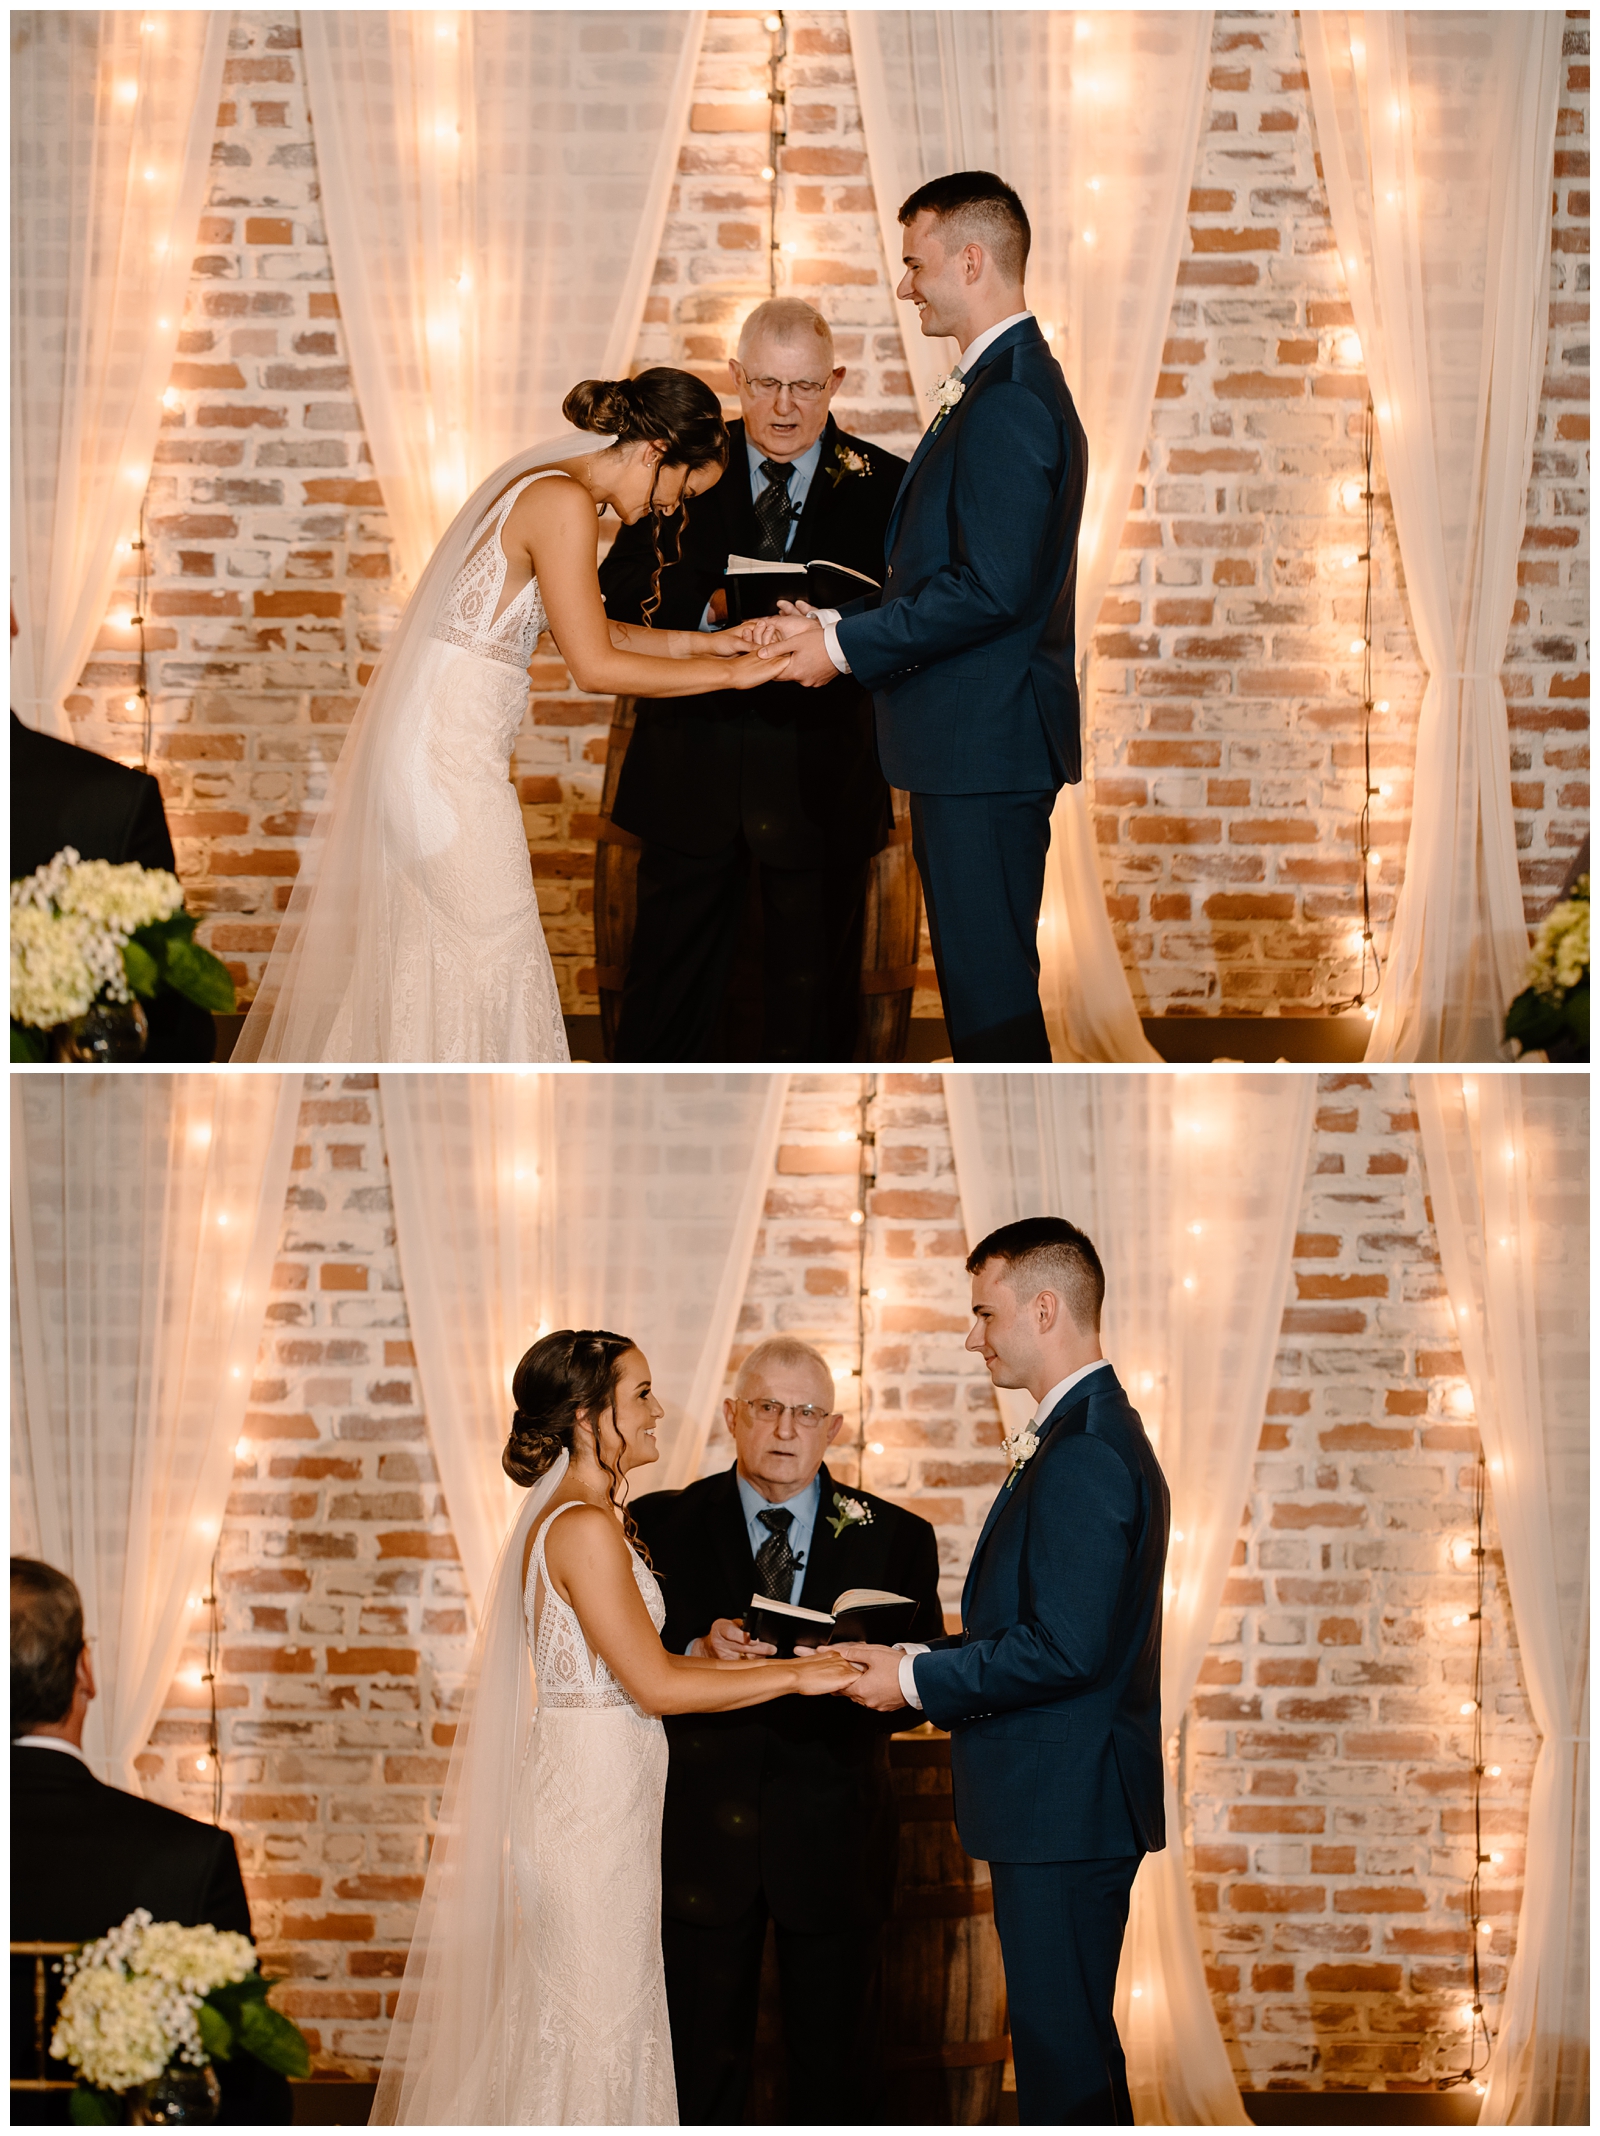 Romantic modern indie wedding ceremony in front of brick wall at historical venue Bakery 1818